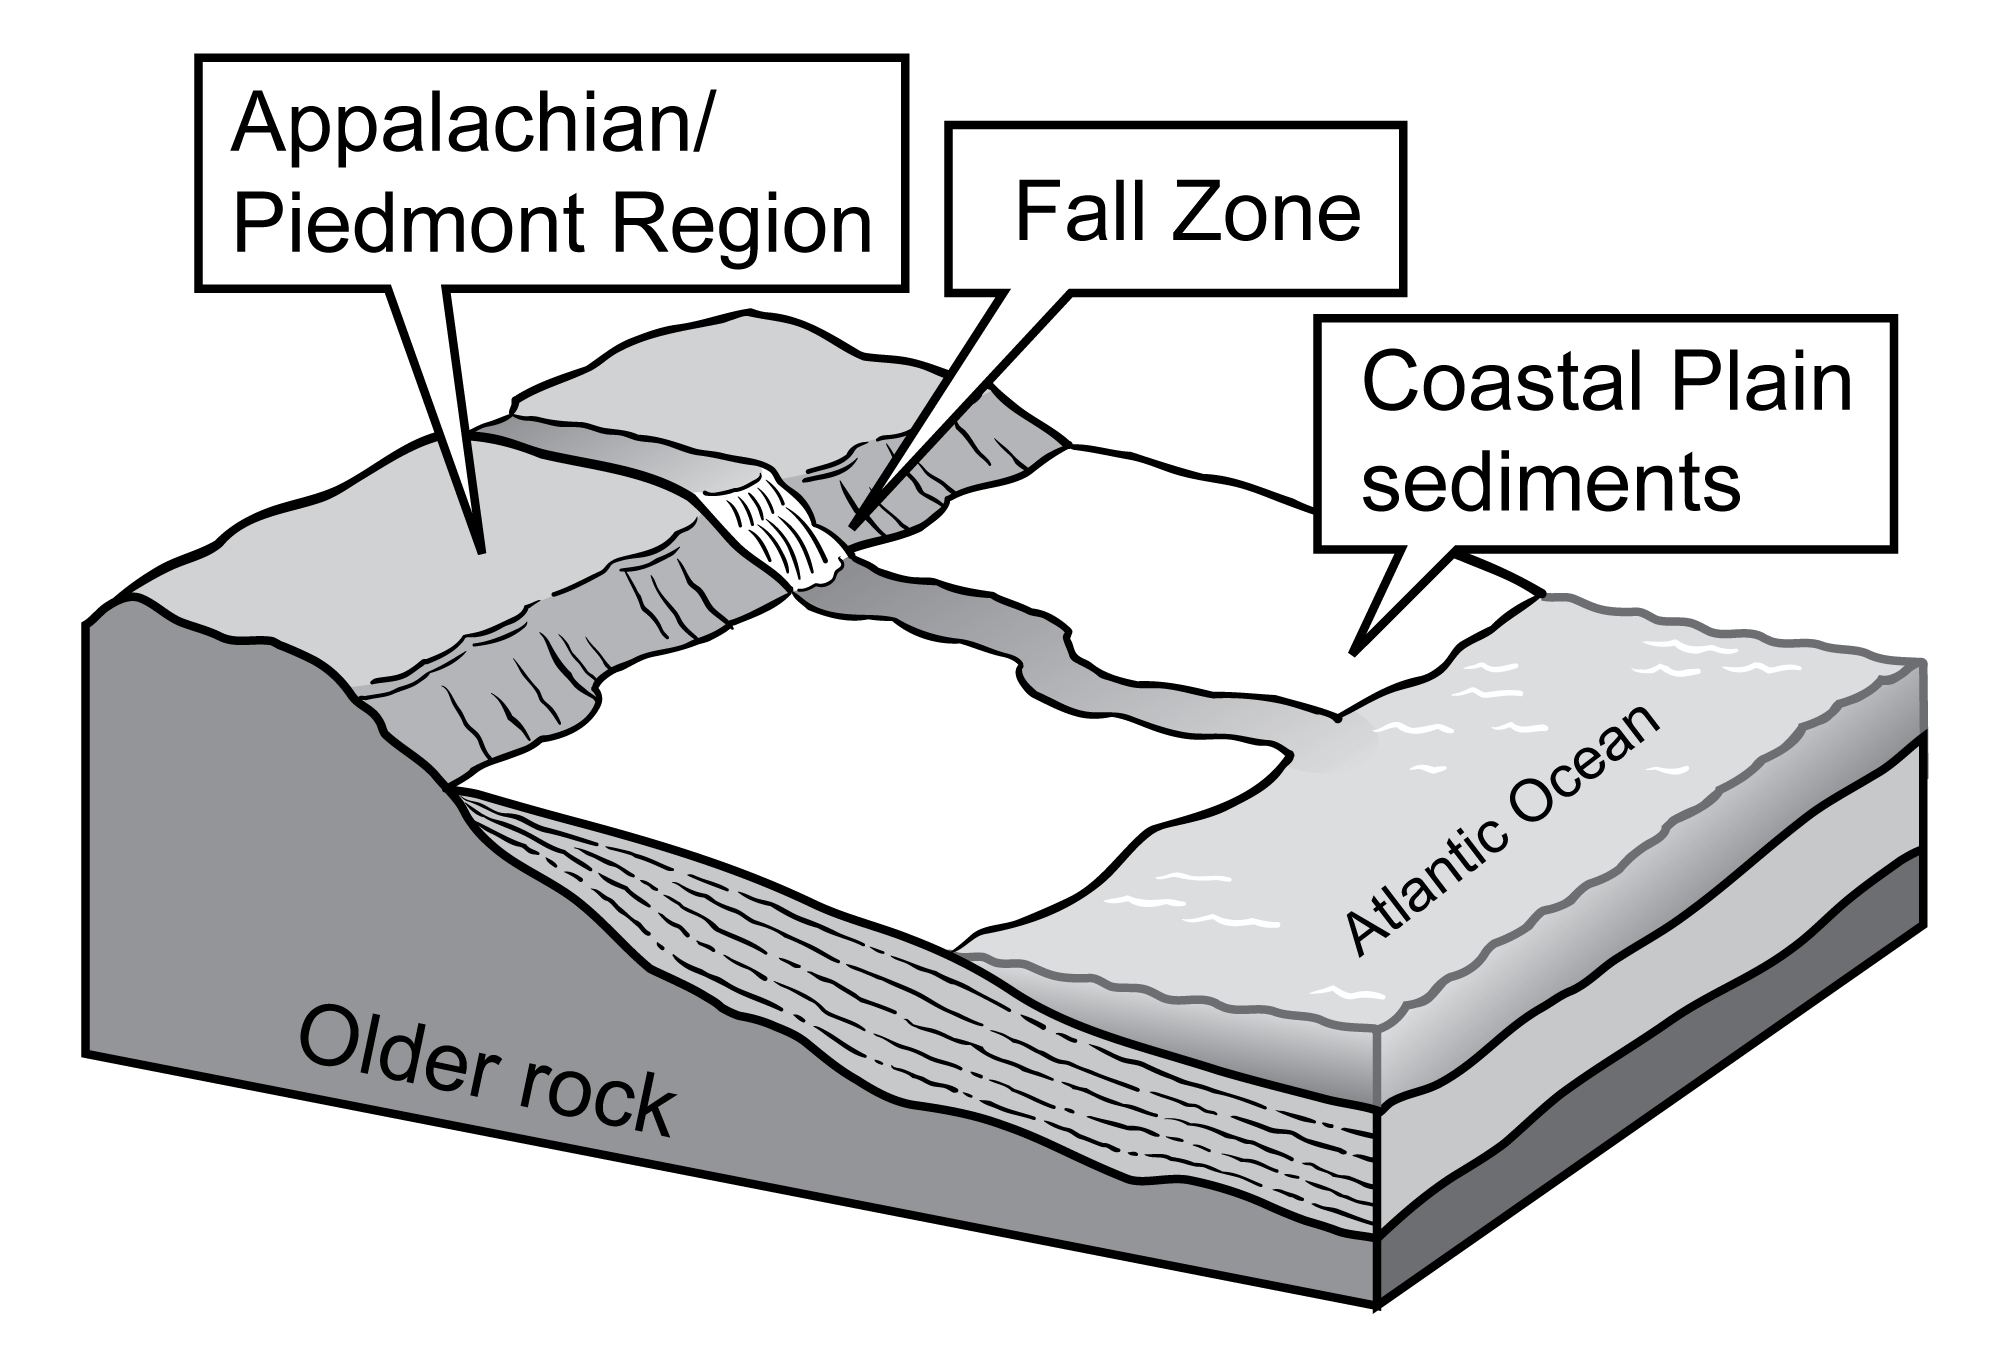 Simple illustration depicting the Fall Zone of the Coastal Plain.